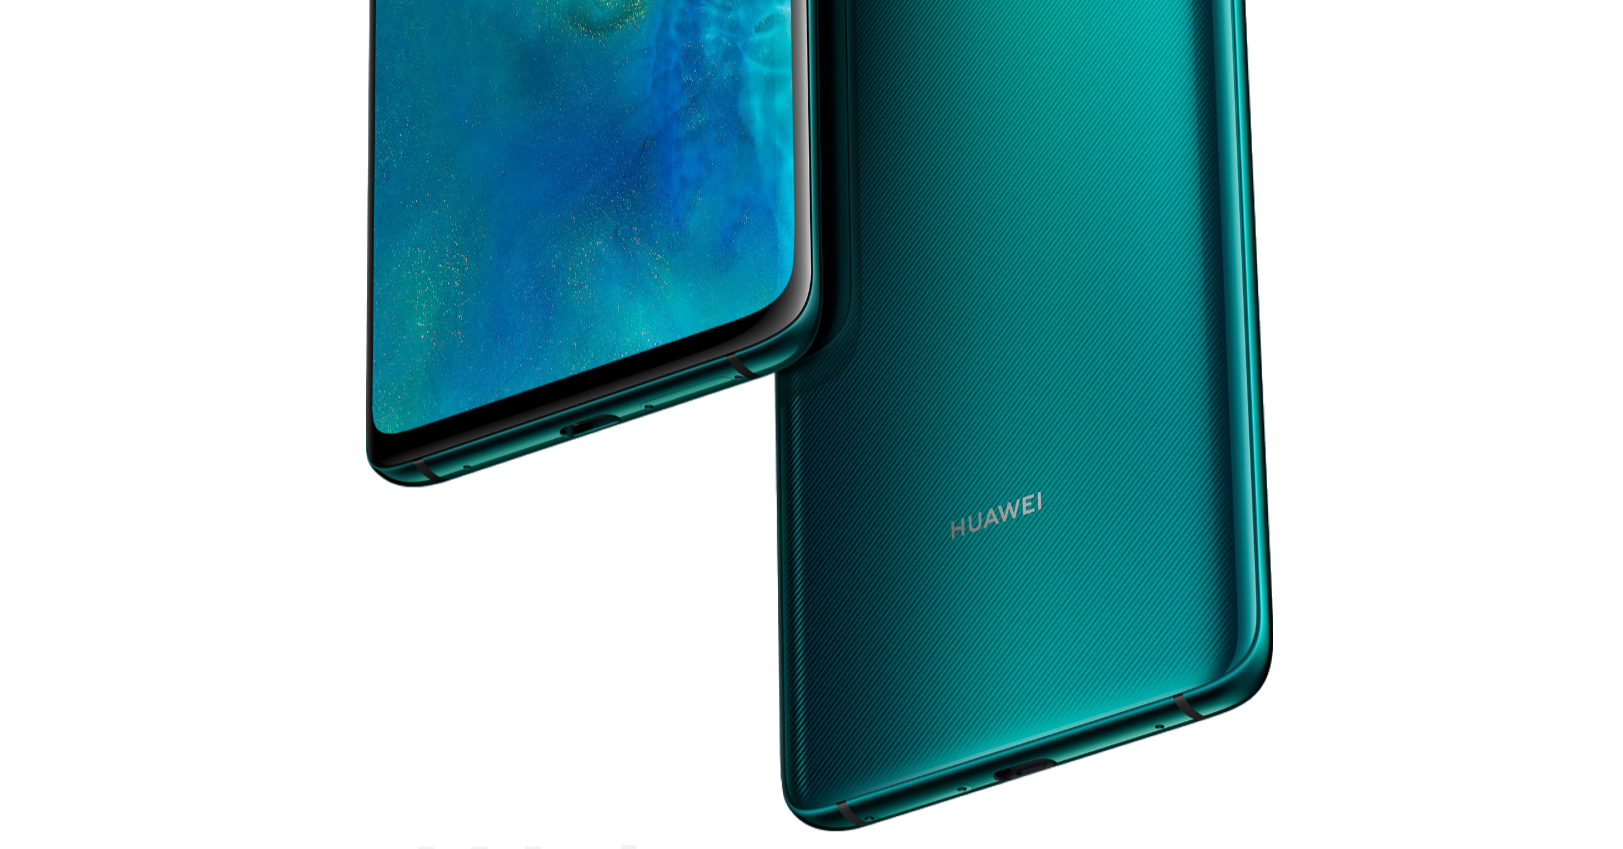 [Updated] Huawei phones in China reportedly not playing well with images downloaded from Twitter